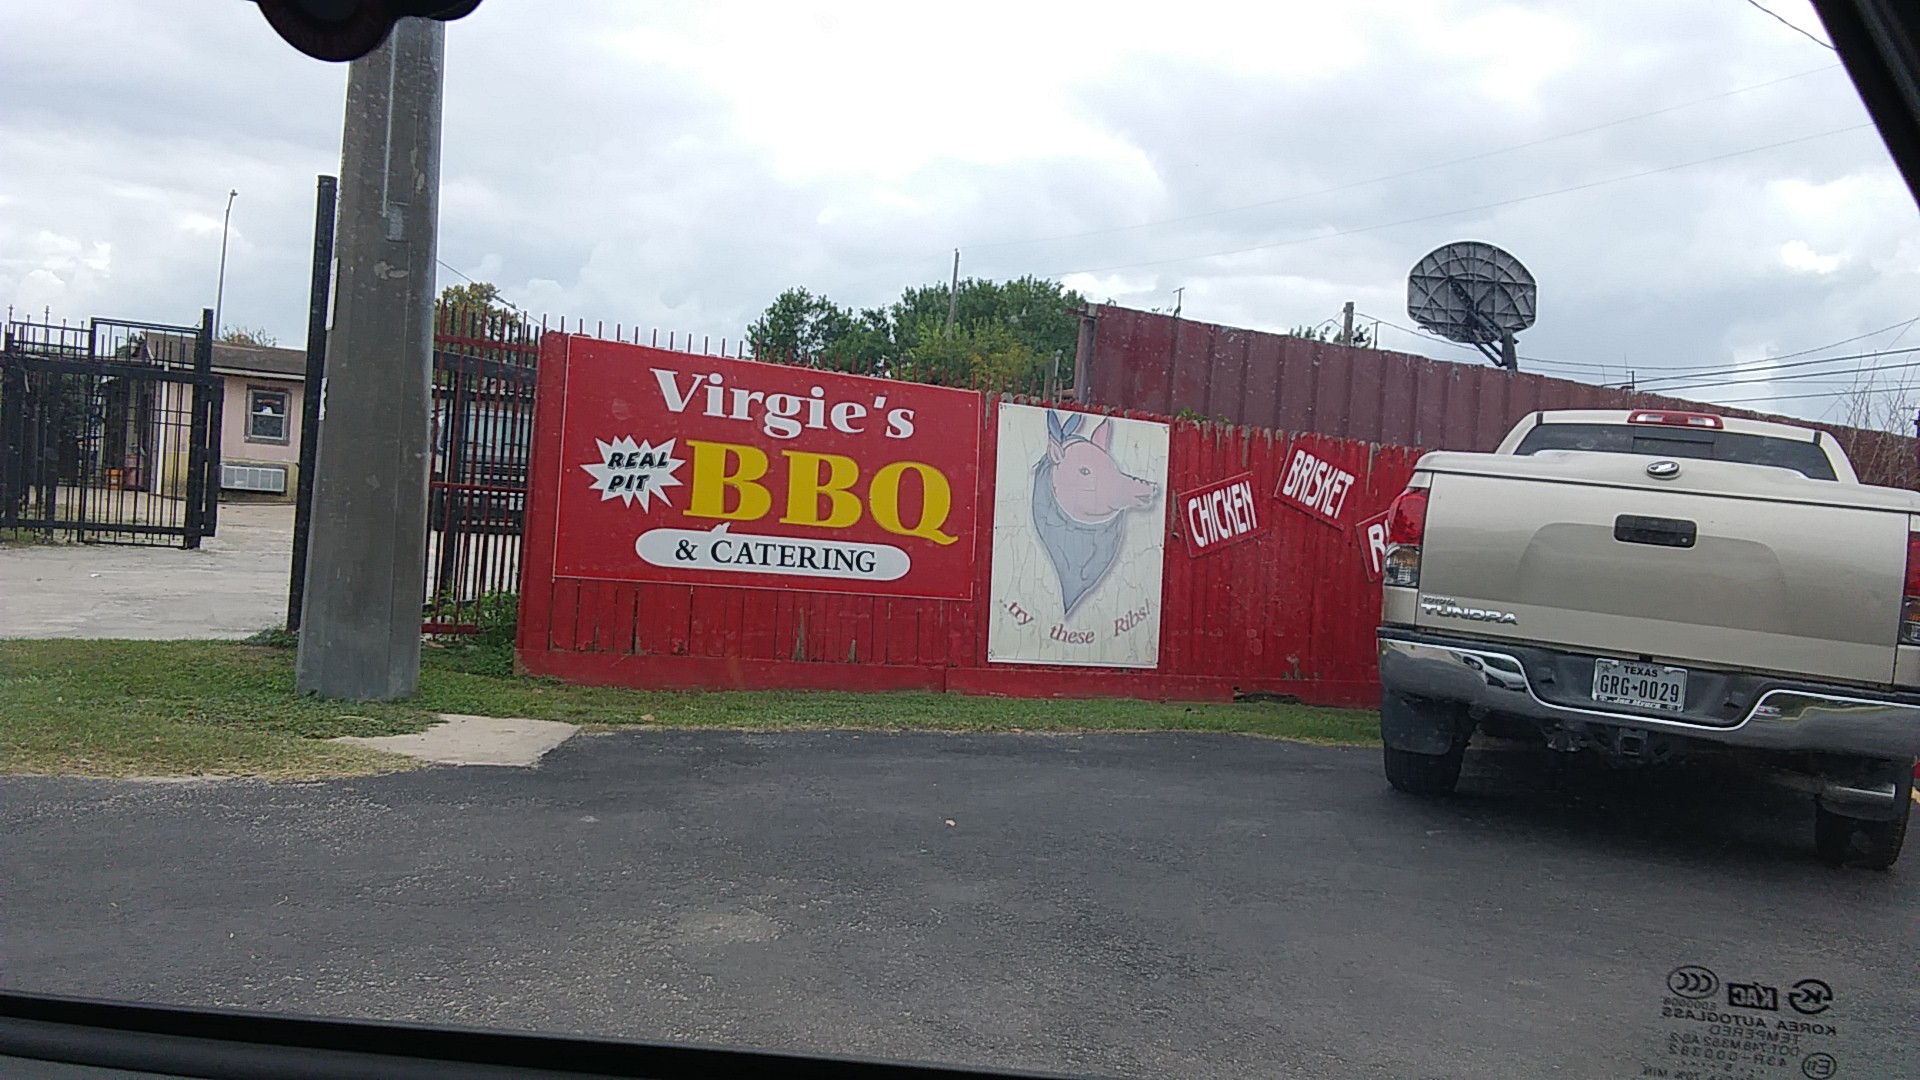 Virgie's BBQ & Catering